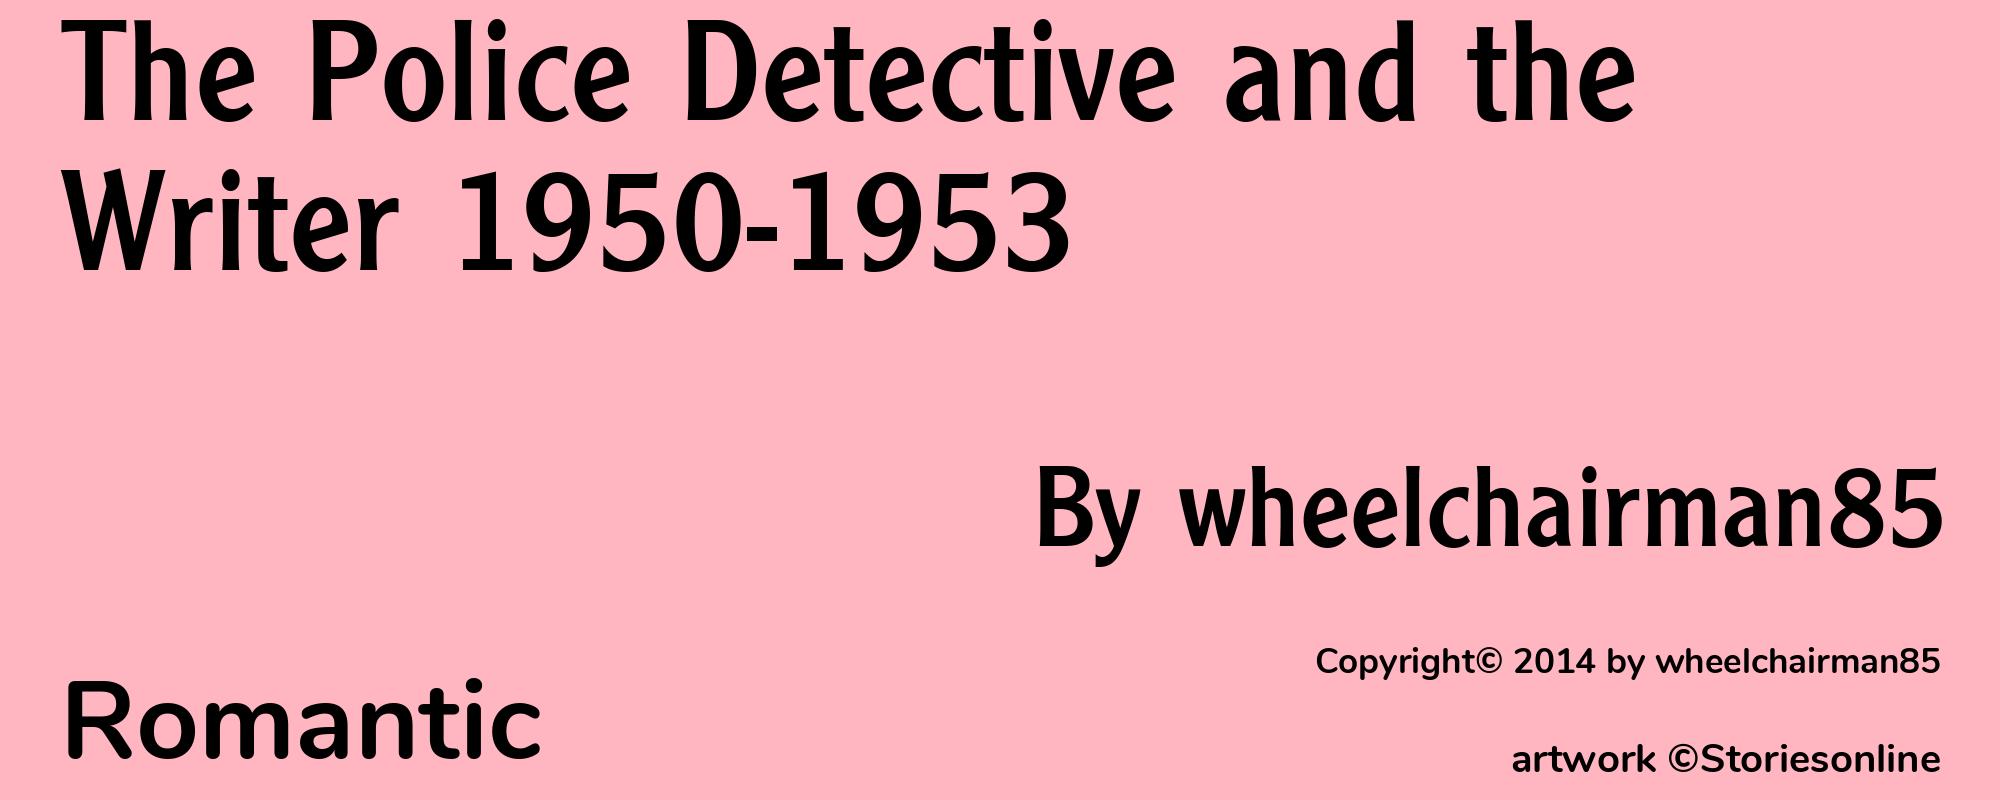 The Police Detective and the Writer 1950-1953 - Cover